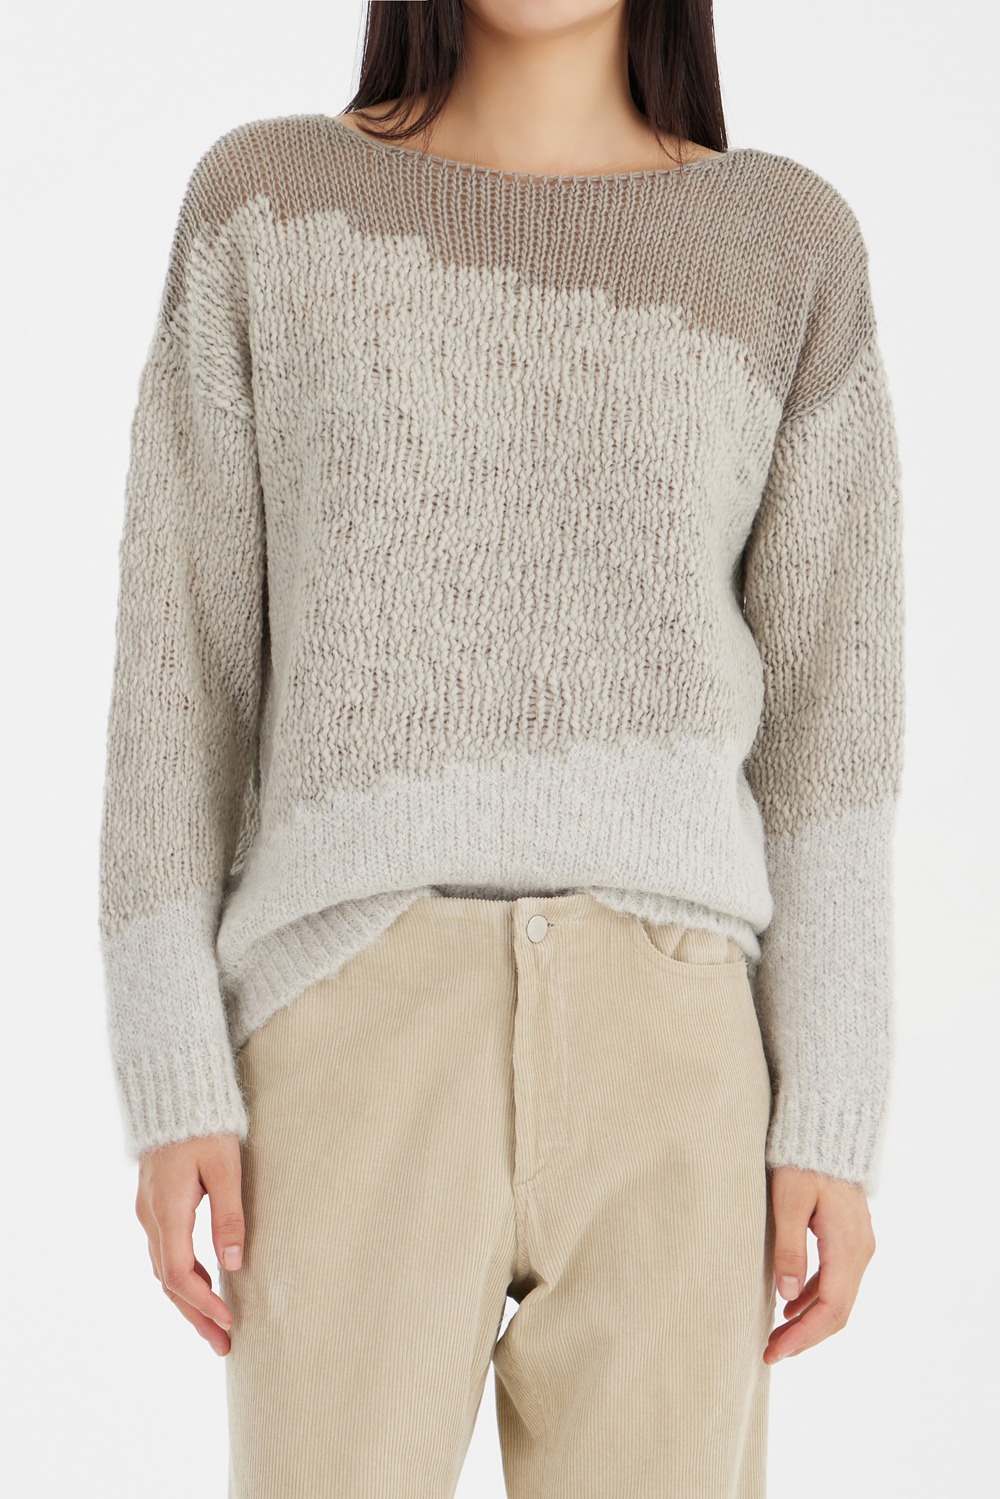 Relaxed See-Through Knit Sweater - Slate